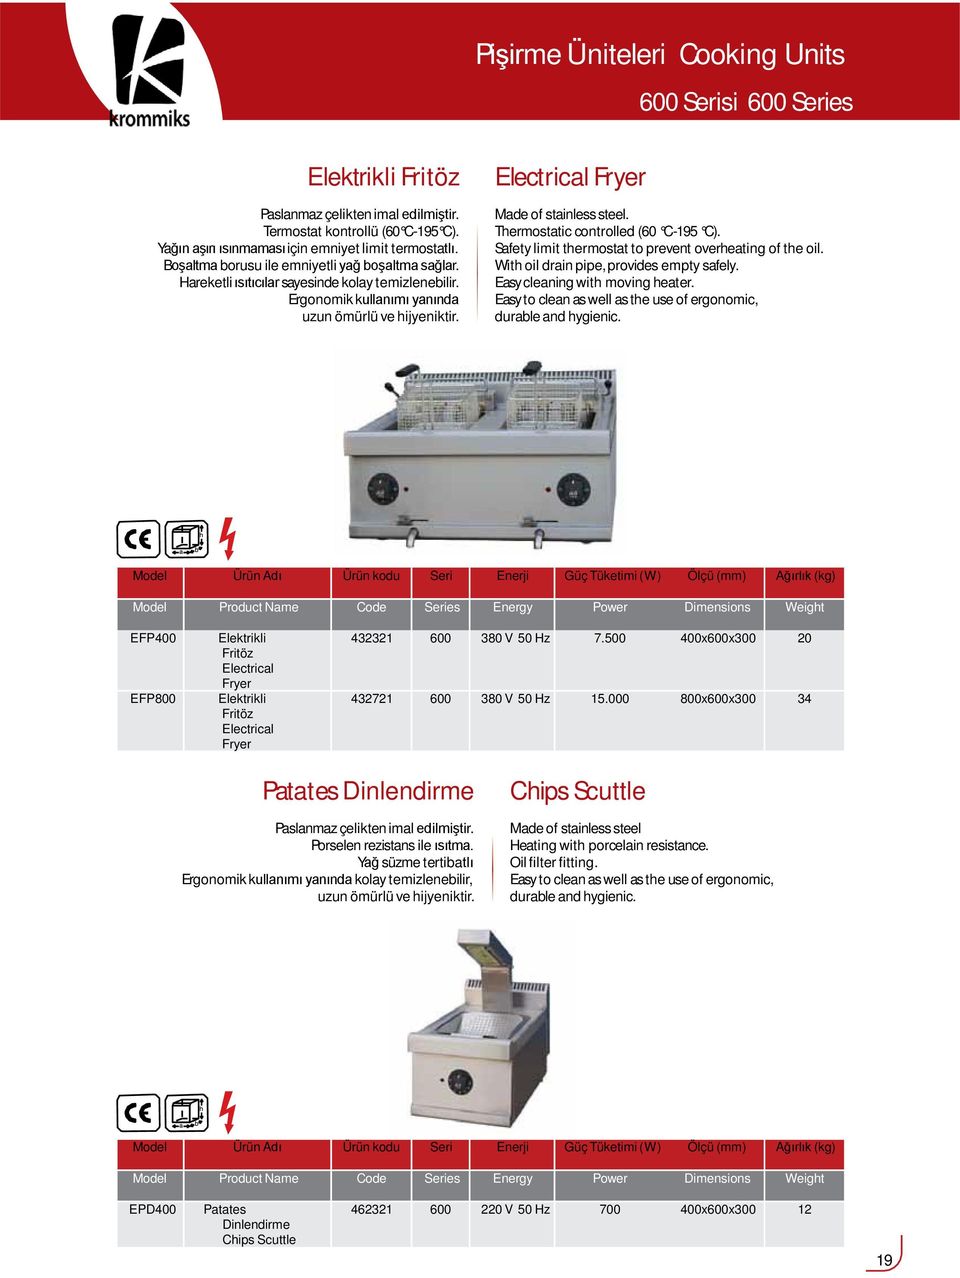 Electrical Fryer Thermostatic controlled (60 C-195 C). Safety limit thermostat to prevent overheating of the oil. Withoil drain pipe, provides empty safely. Easycleaning with moving heater.